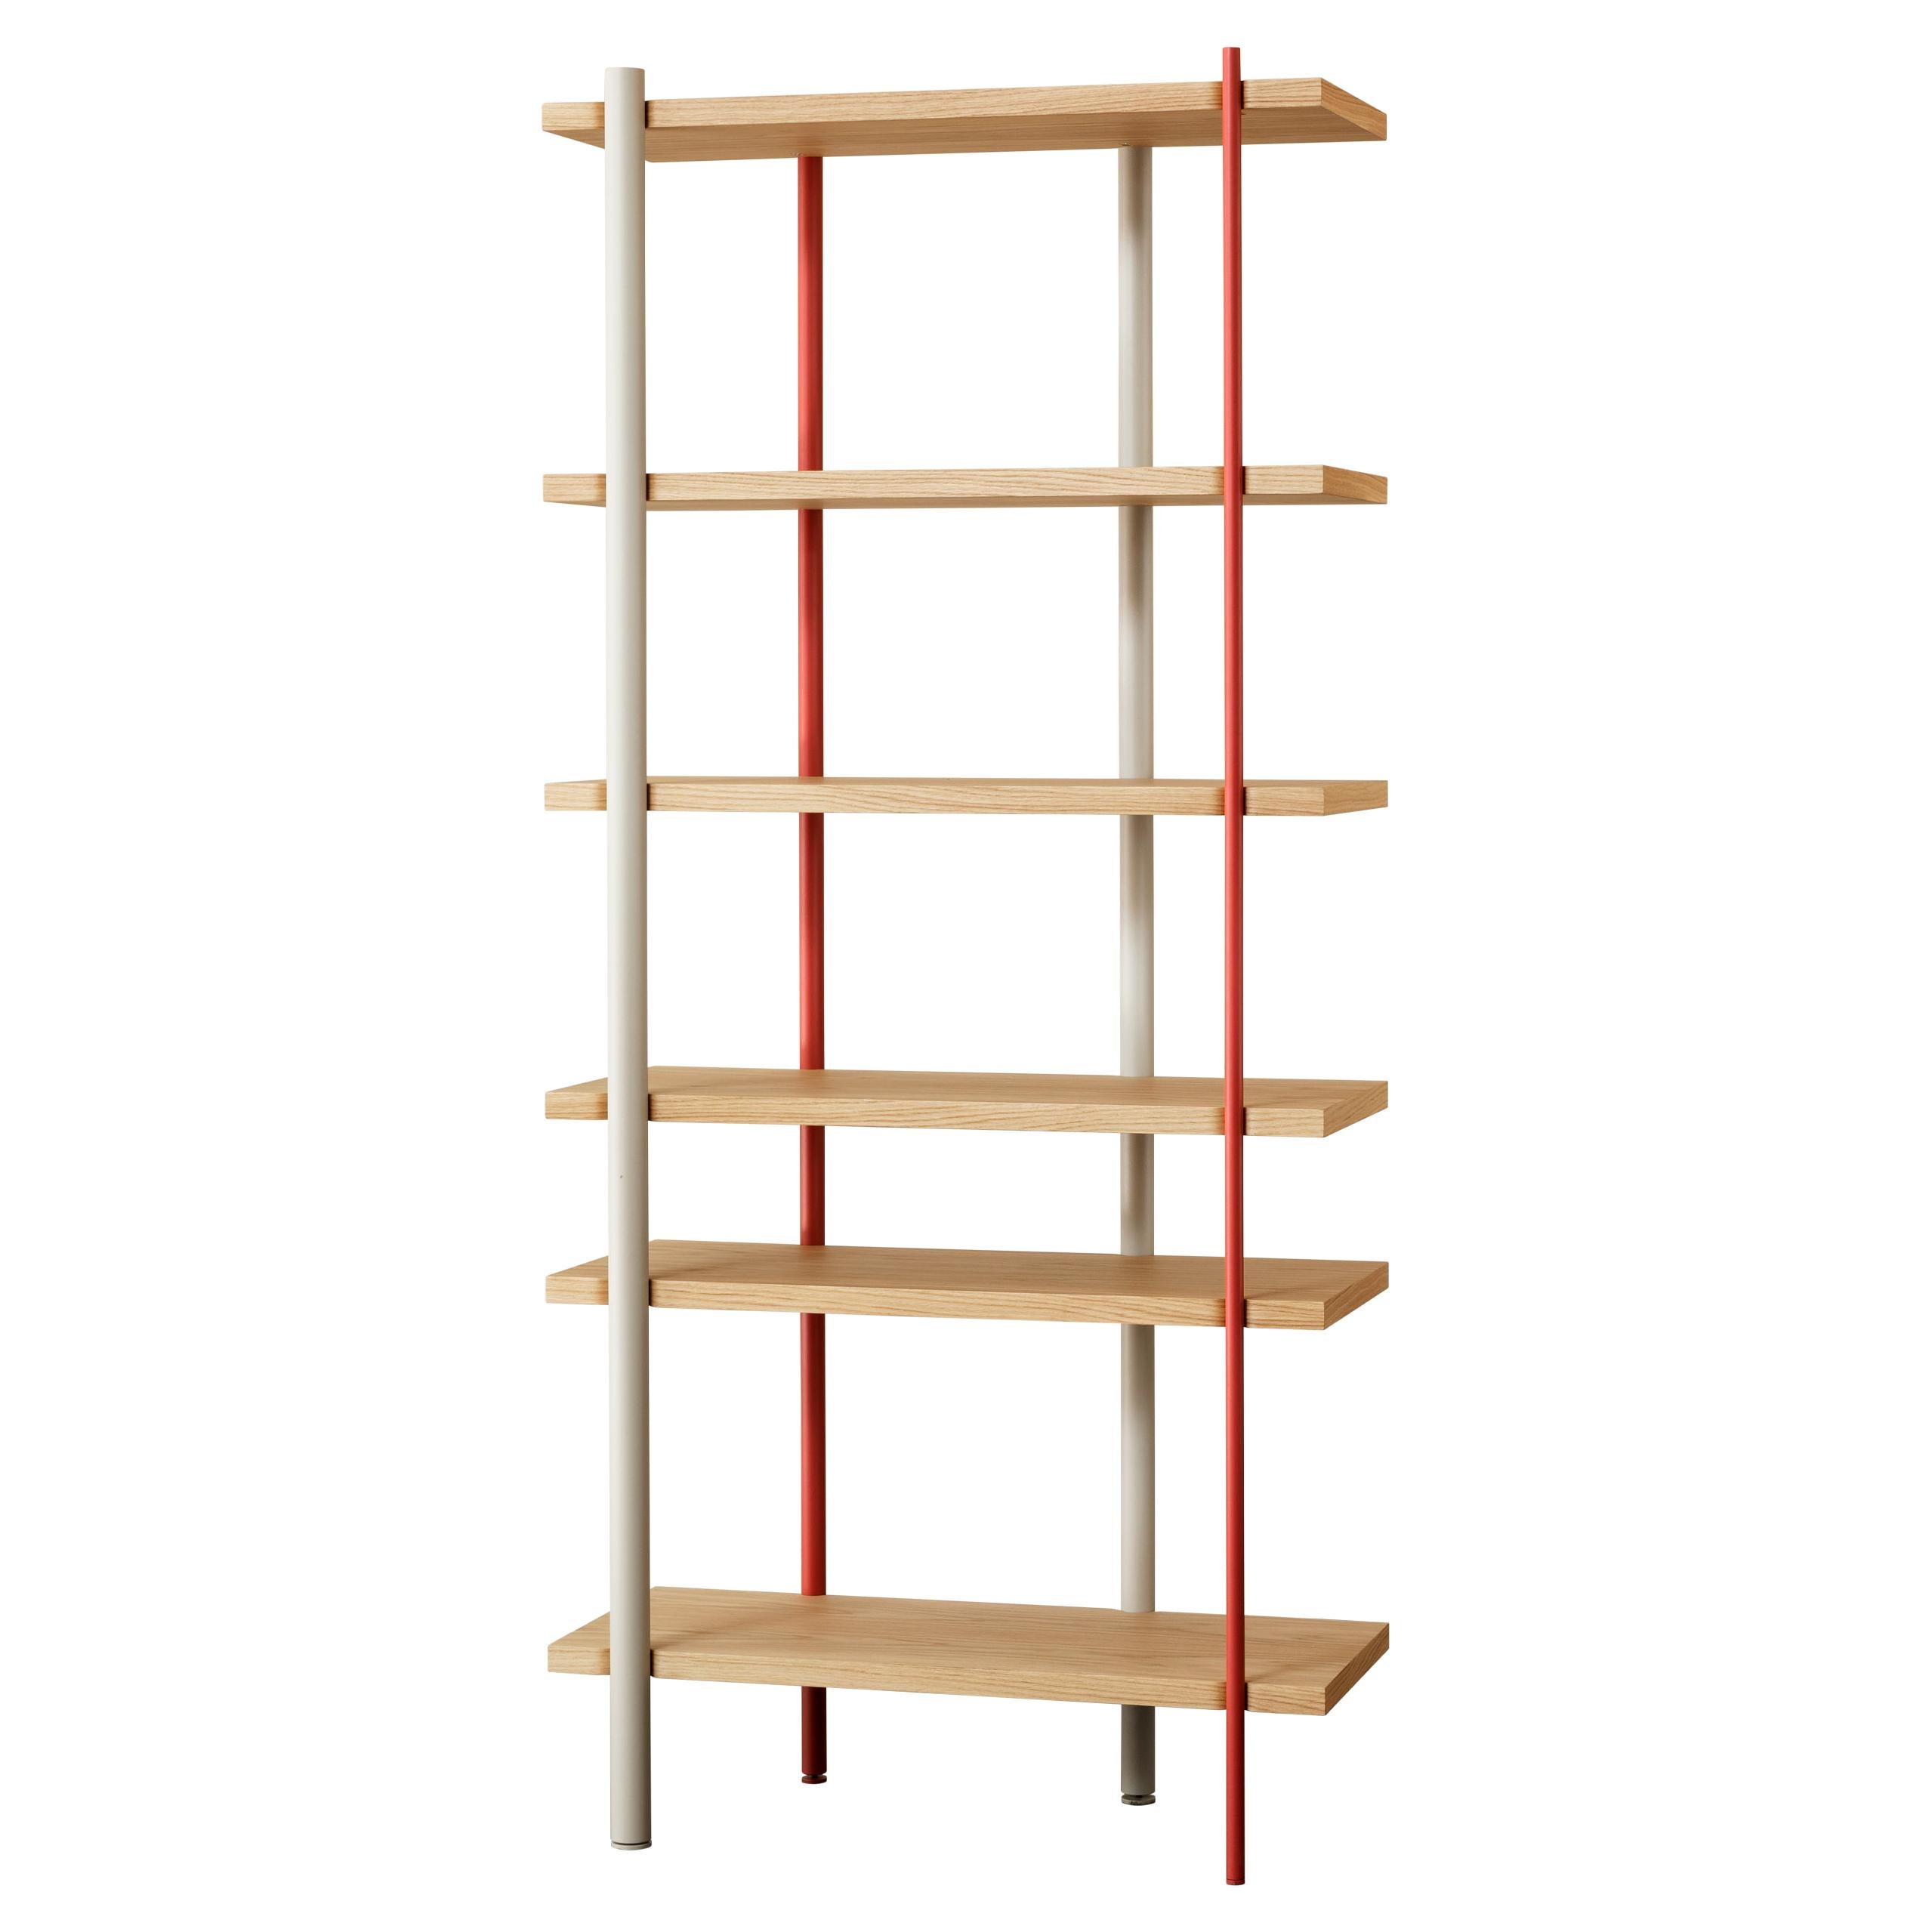 Milonga Bookcase in Lacquered Iron with Flamed Oak Shelves by Paolo Cappello For Sale